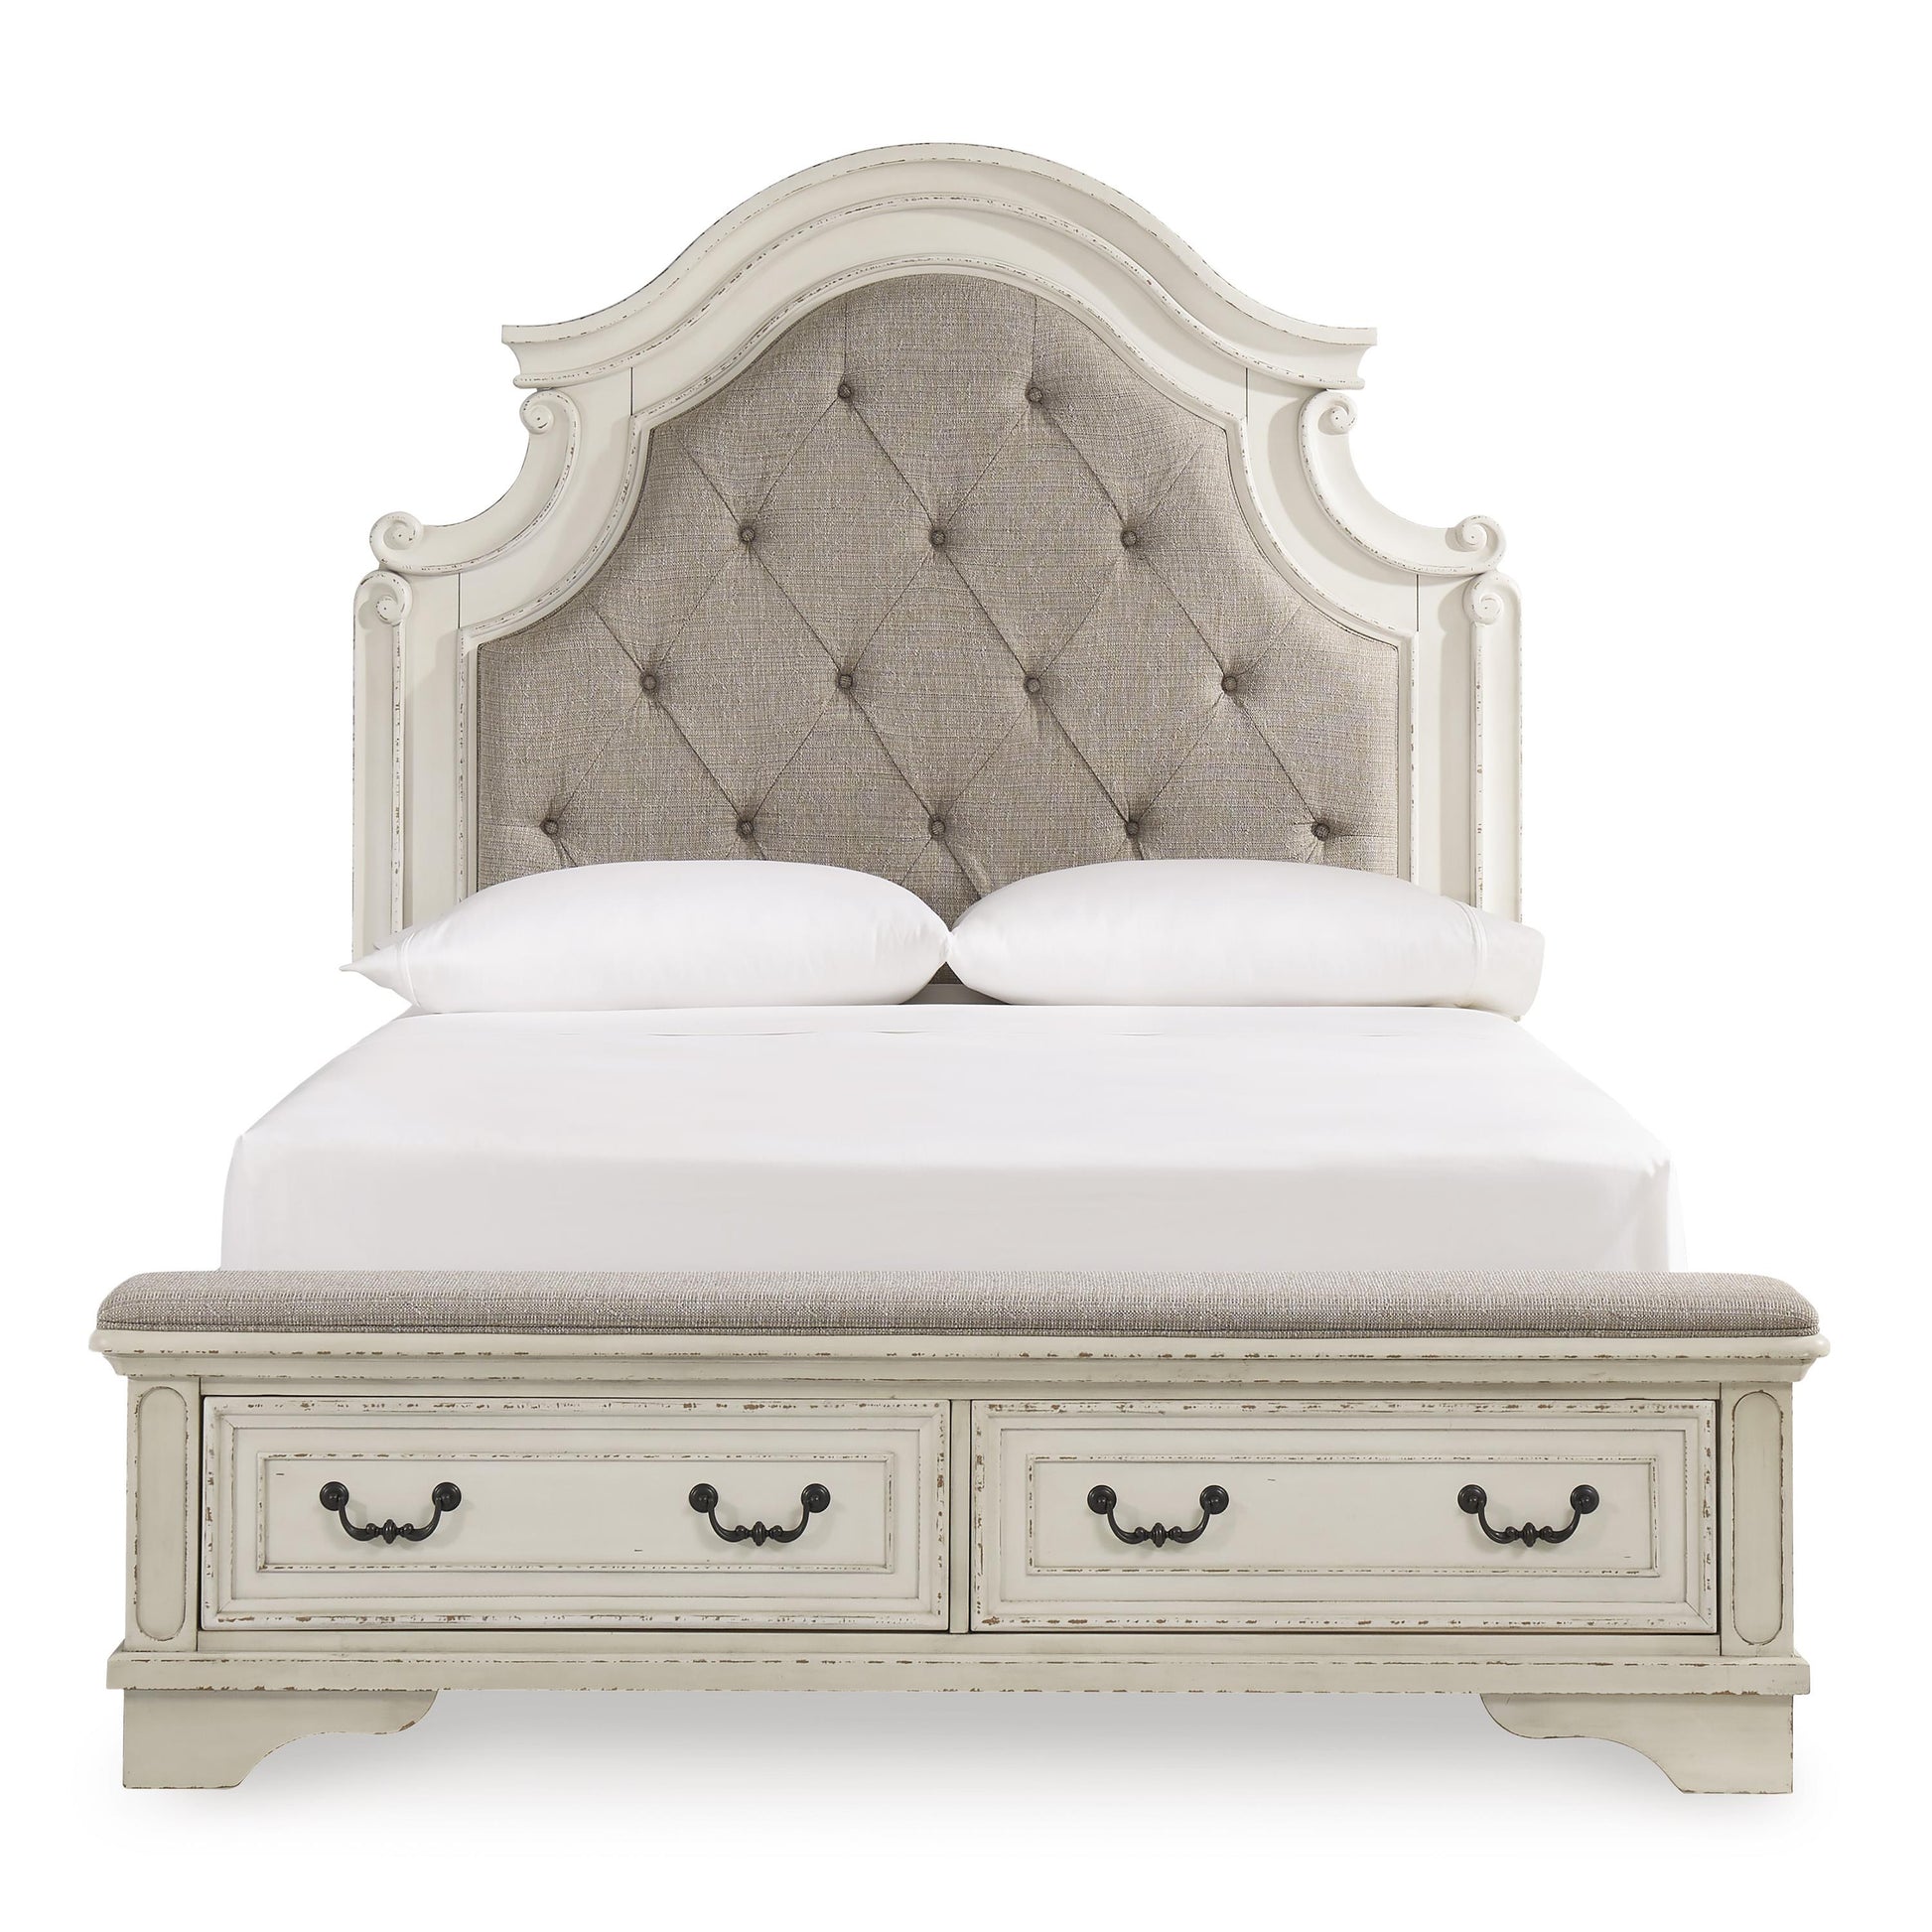 Signature Design by Ashley Realyn Queen Upholstered Platform Bed B743-57/B743-54S/B743-196 IMAGE 2